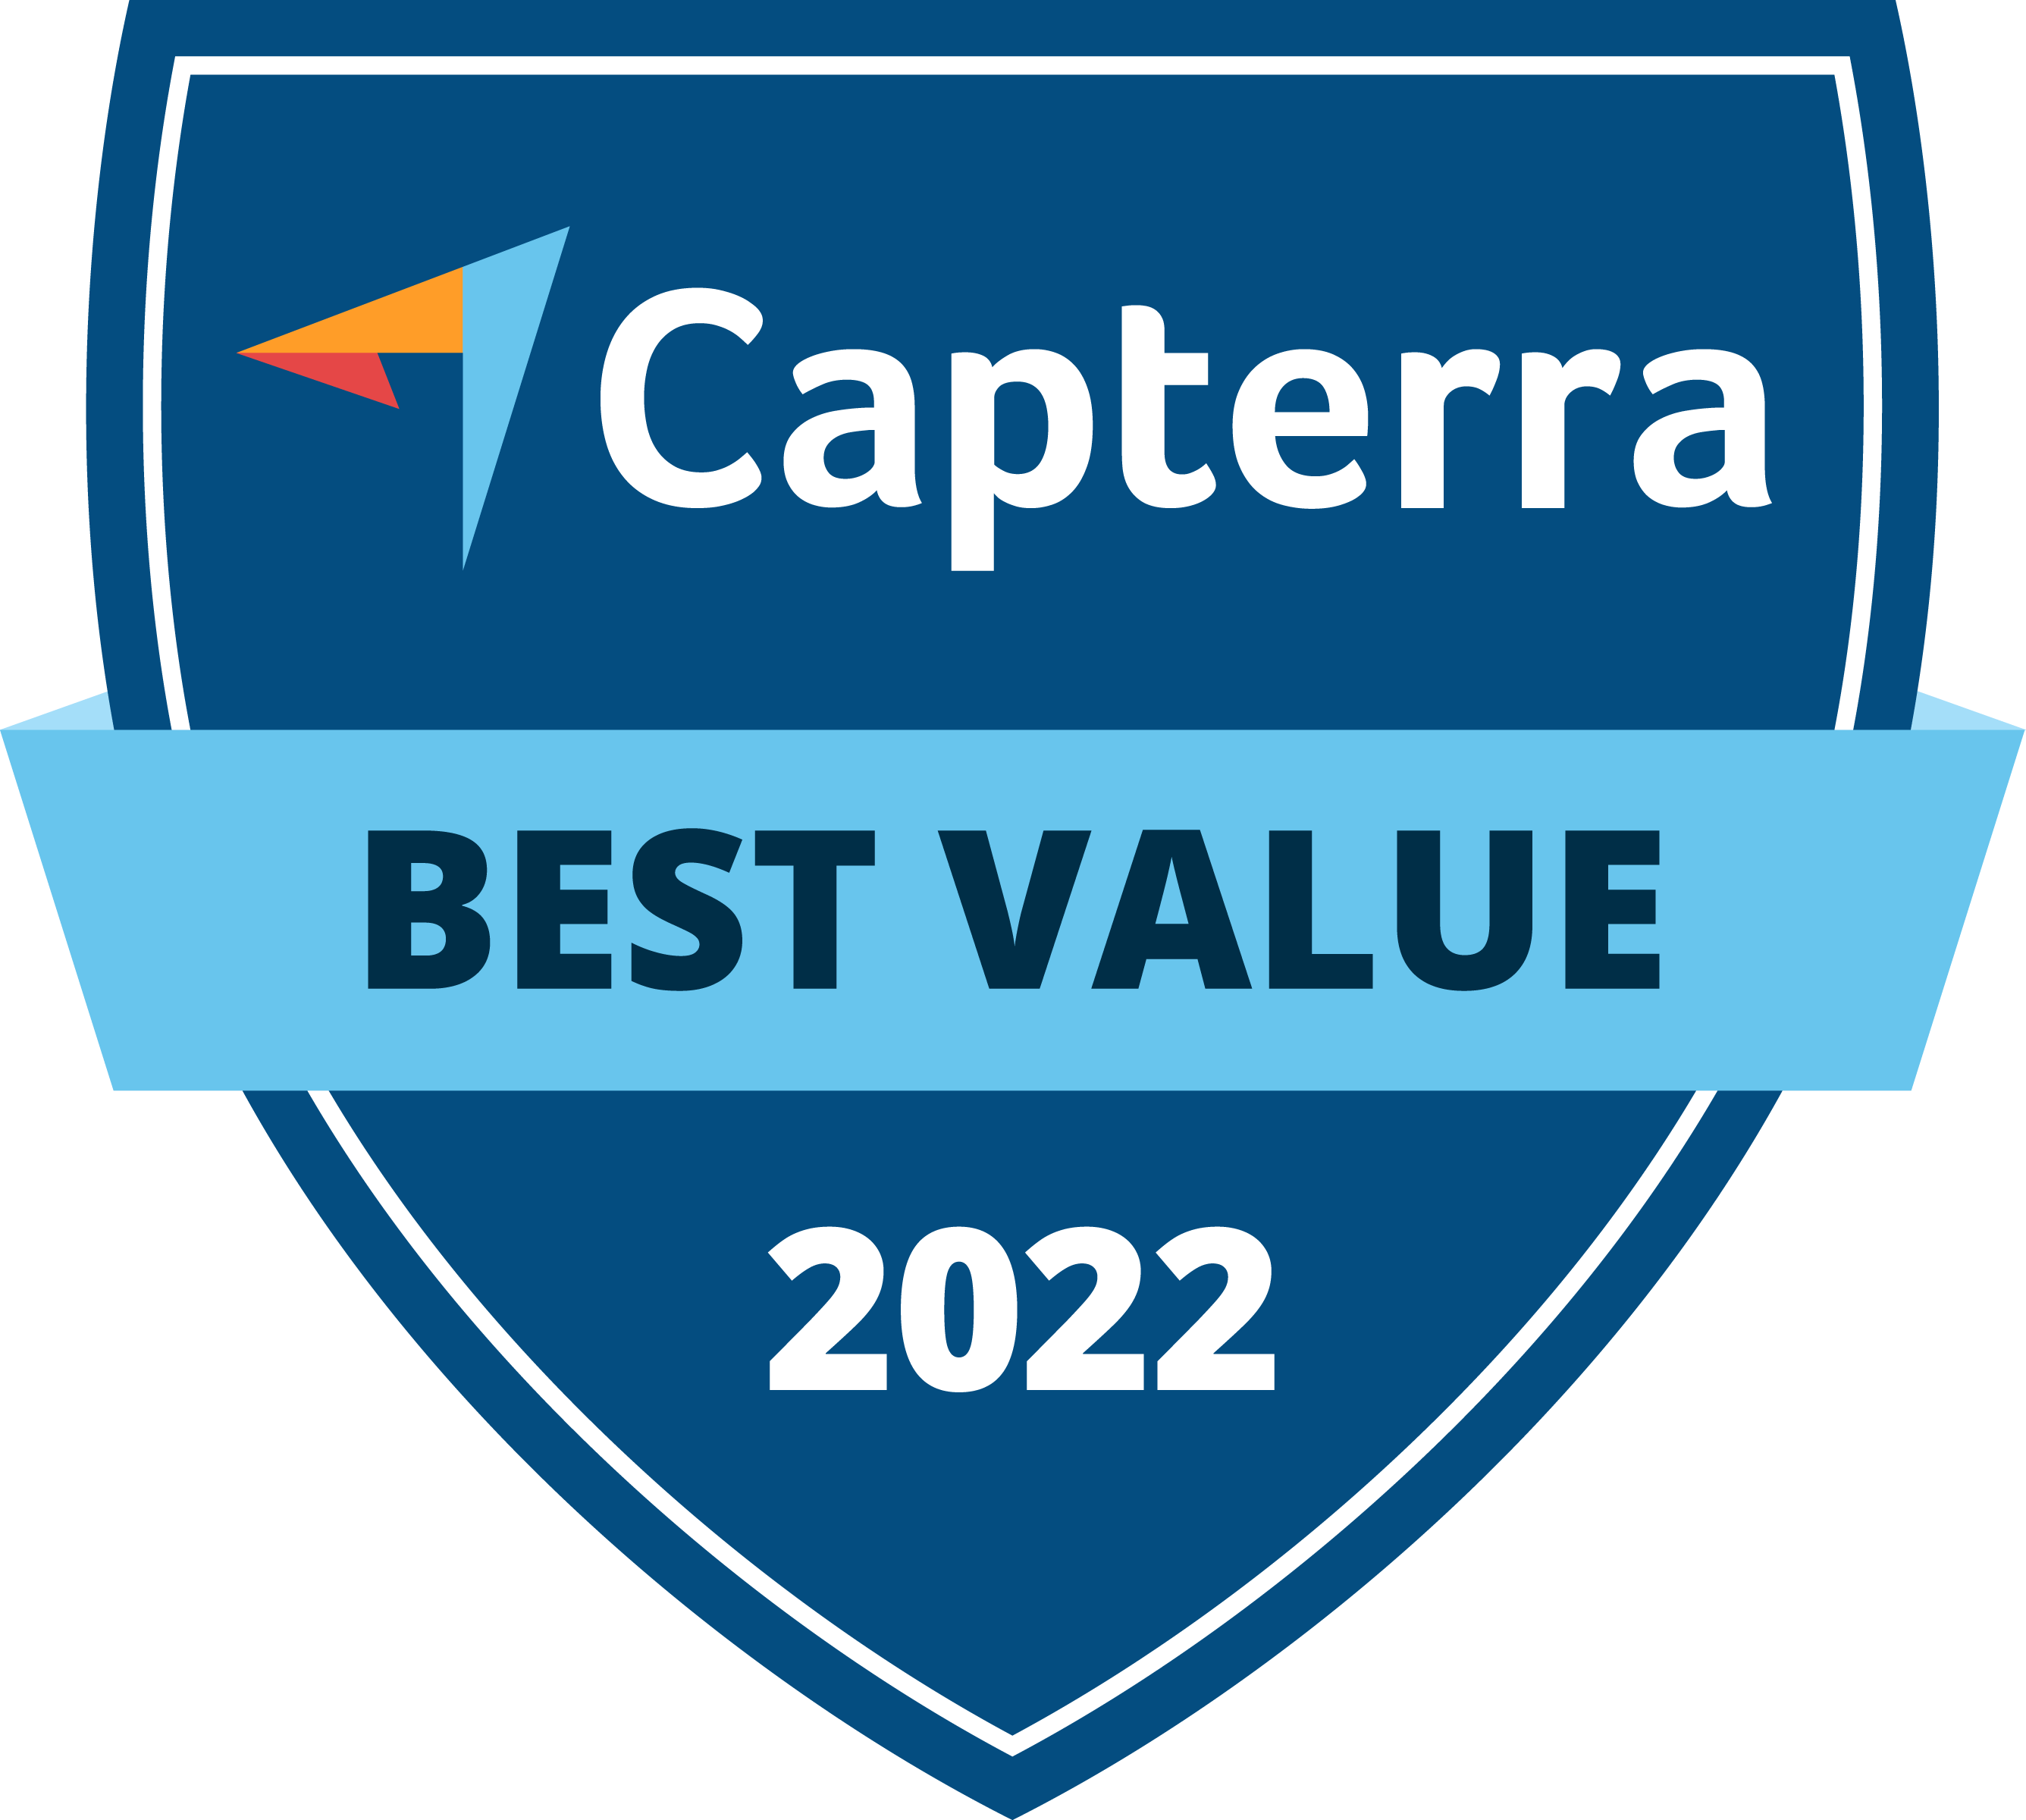 CapterraJob Board Software Best Value 2022